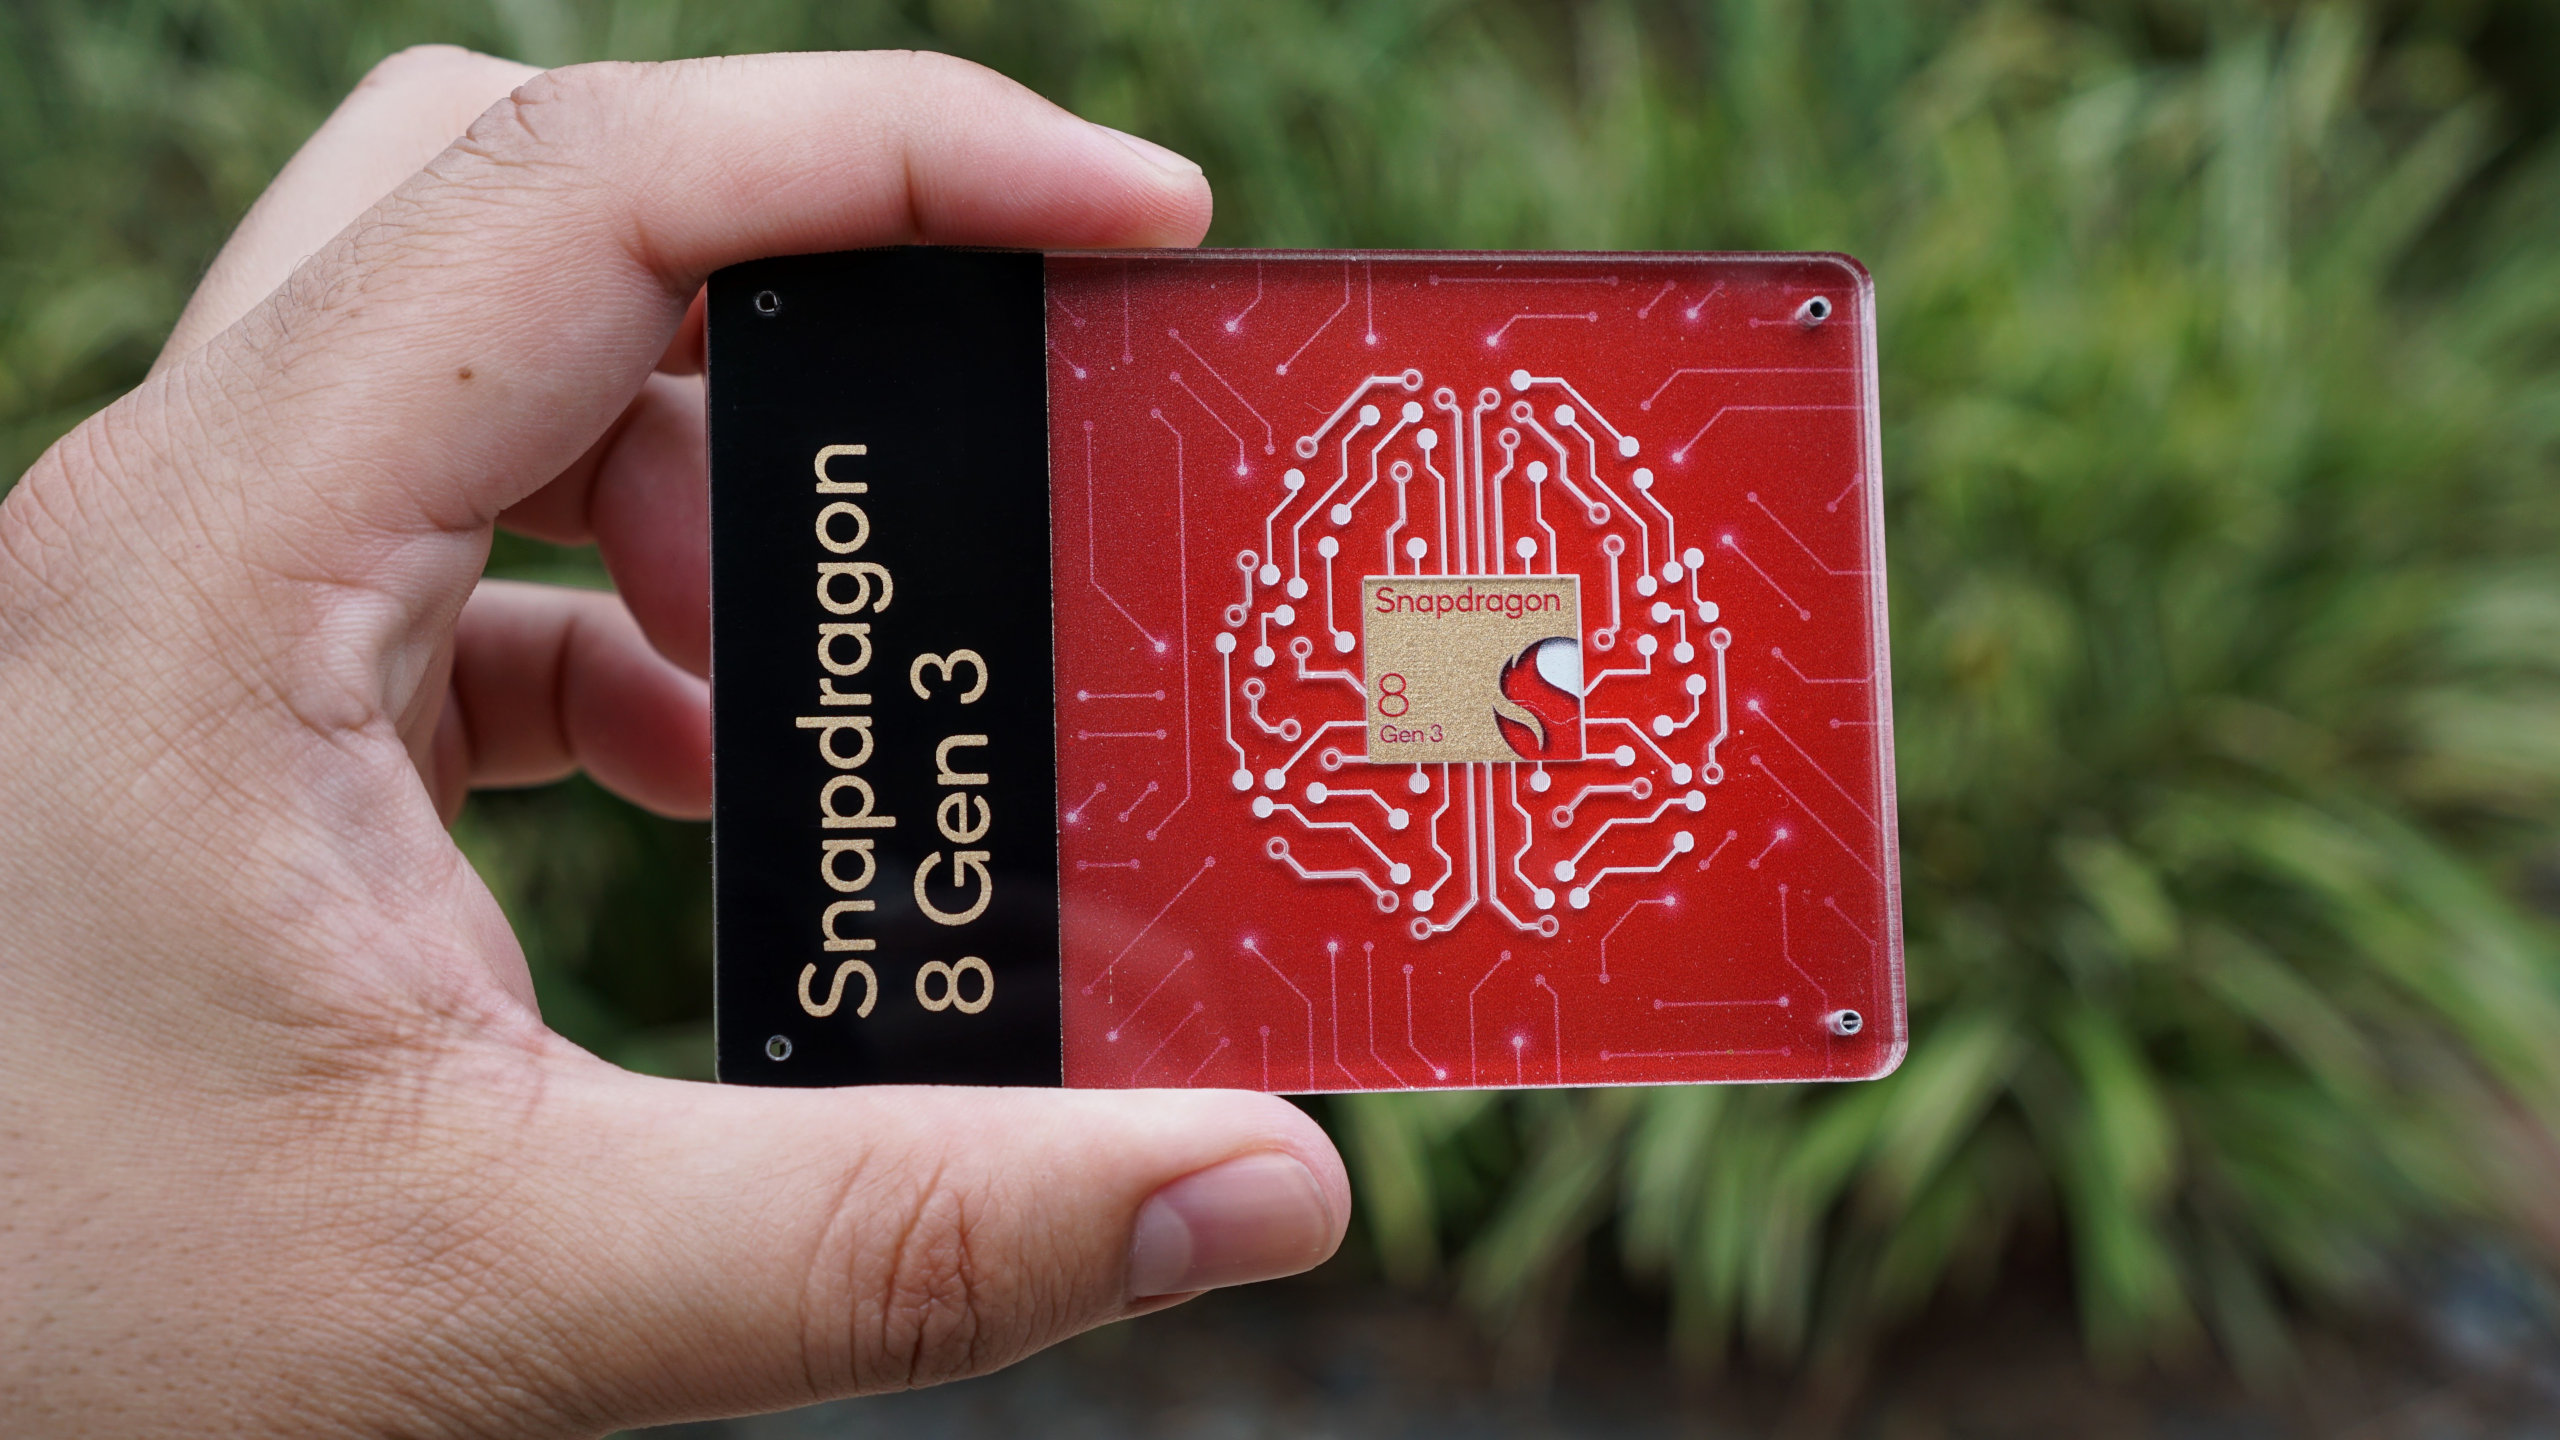 A photo of the Qualcomm Snapdragon 8 Gen 3 chip.